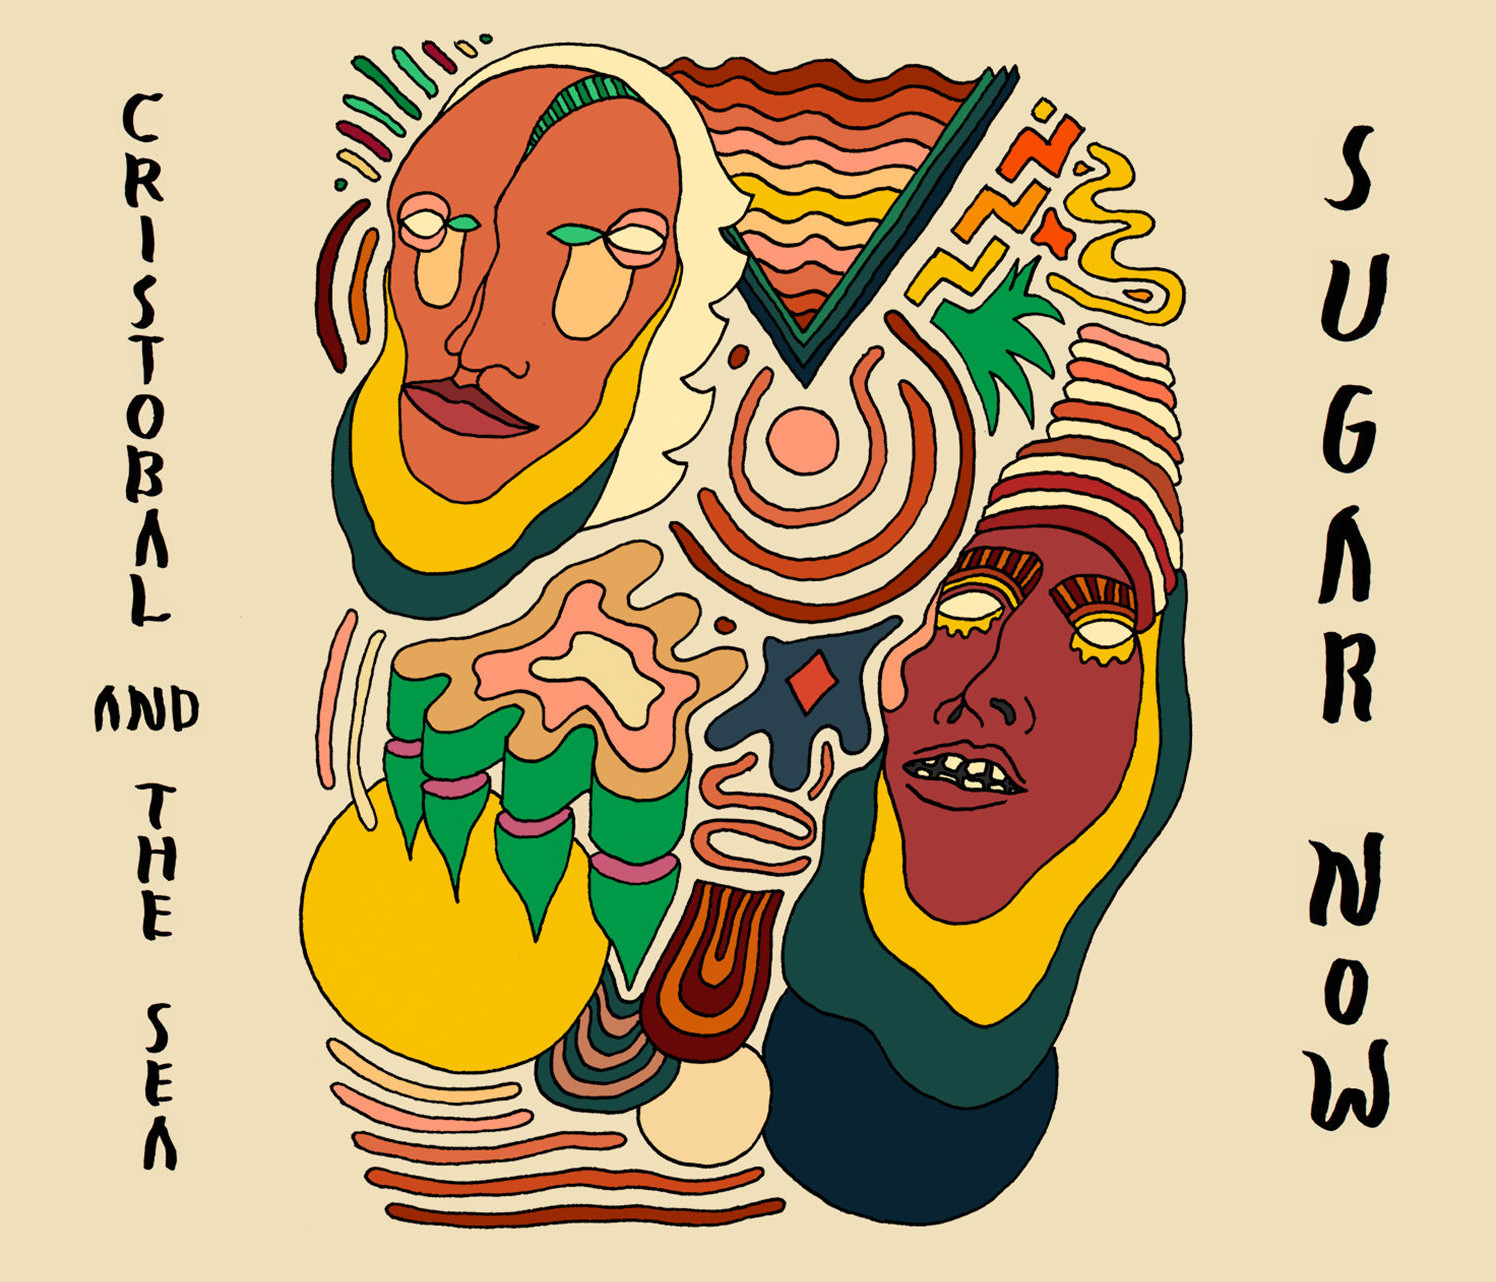 Review of 'Sugar Now' the new album by Cristobal and the Sea, the band's full-length comes out on October 2nd via City Slang.